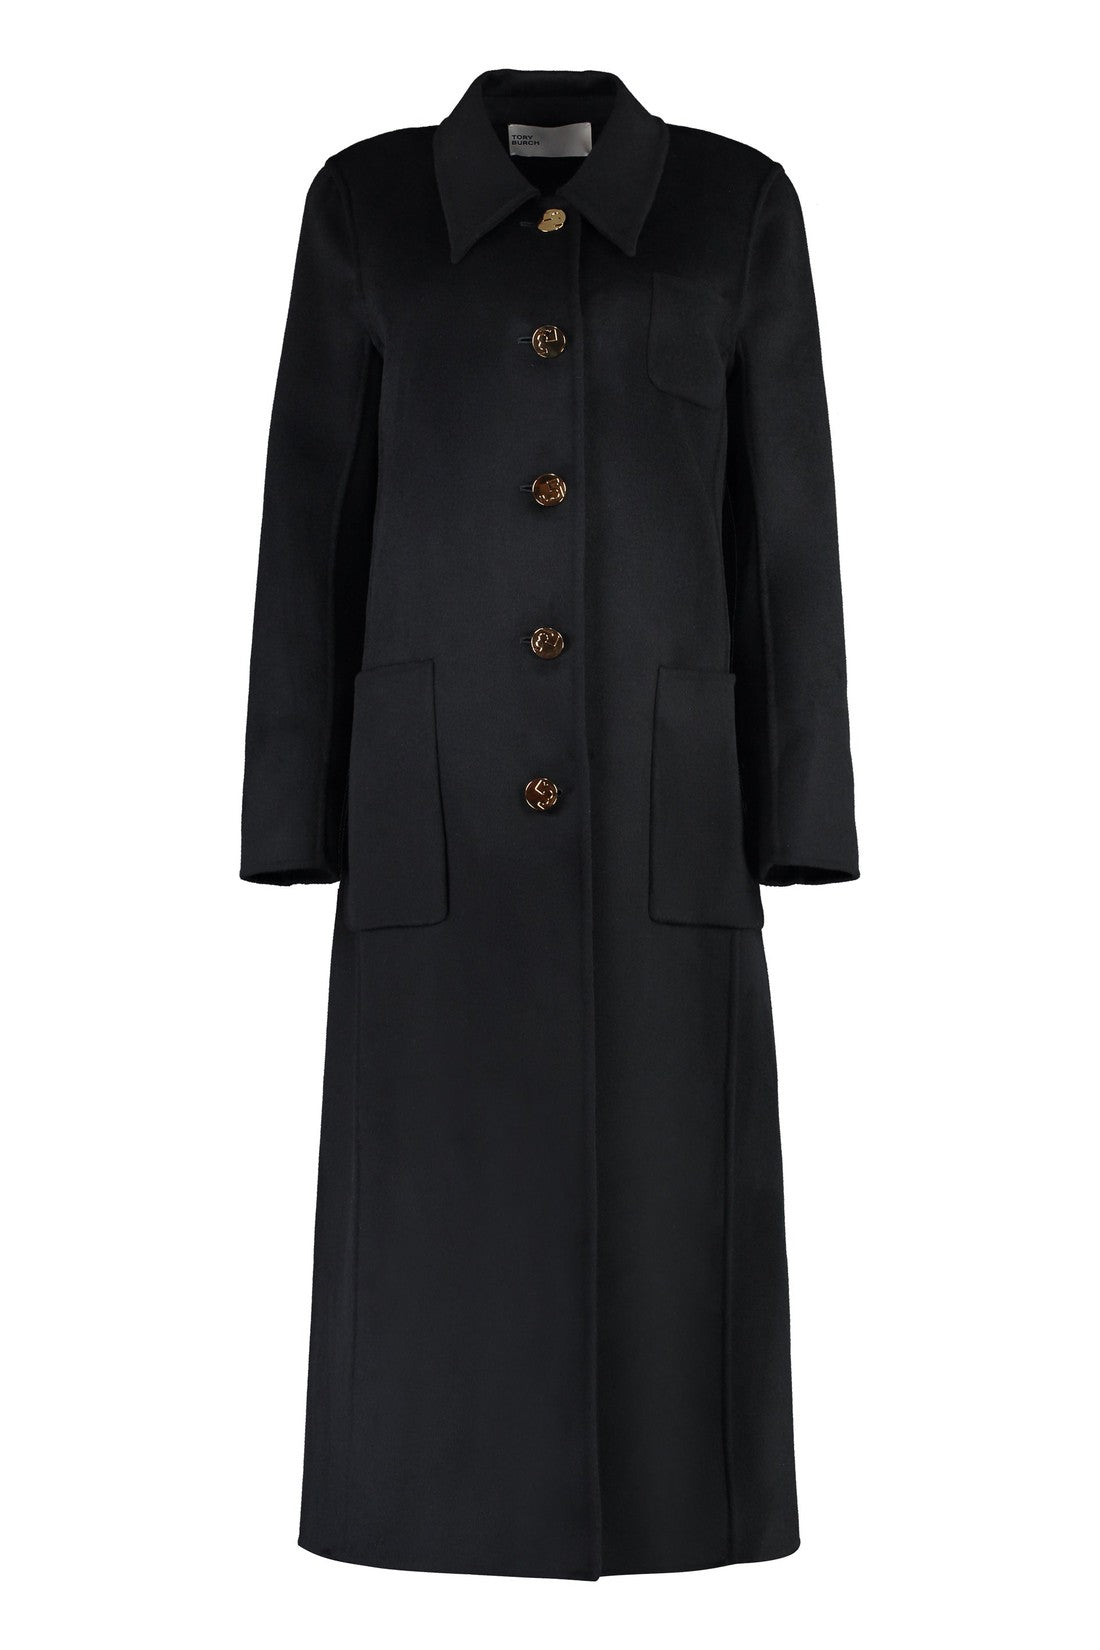 Tory Burch-OUTLET-SALE-Single-breasted wool coat-ARCHIVIST